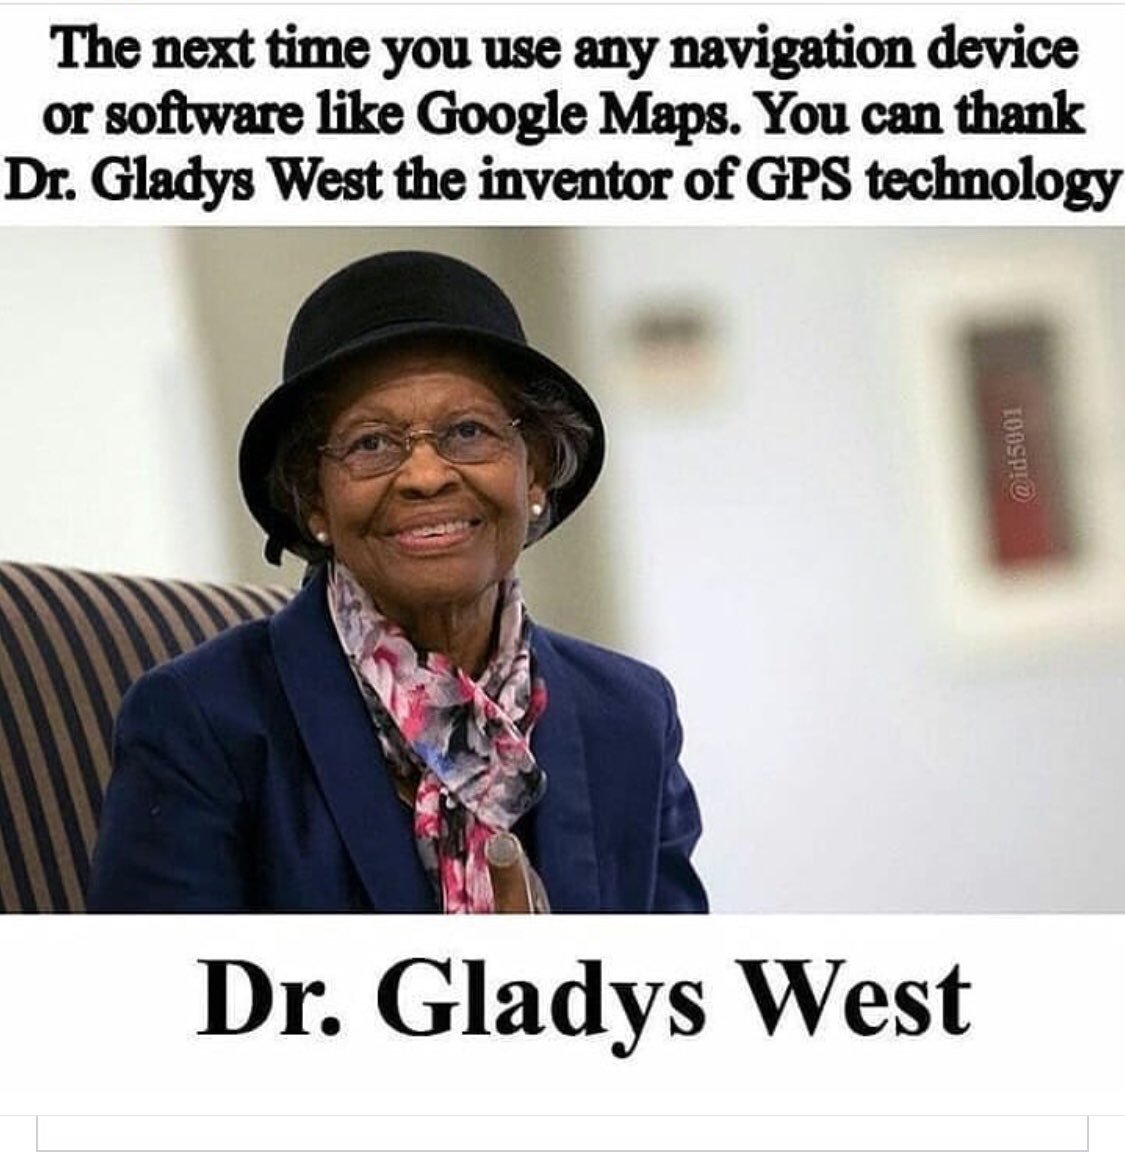 She deserves to be famous. Luckily, she is a hidden figure no longer. 
Dr Gladys West ♥️ 
What a wonderful mind!
Make brilliant people famous ♥️

#gladyswest #brilliantwomen #gps #womeninstem #makebrilliantpeoplefamous